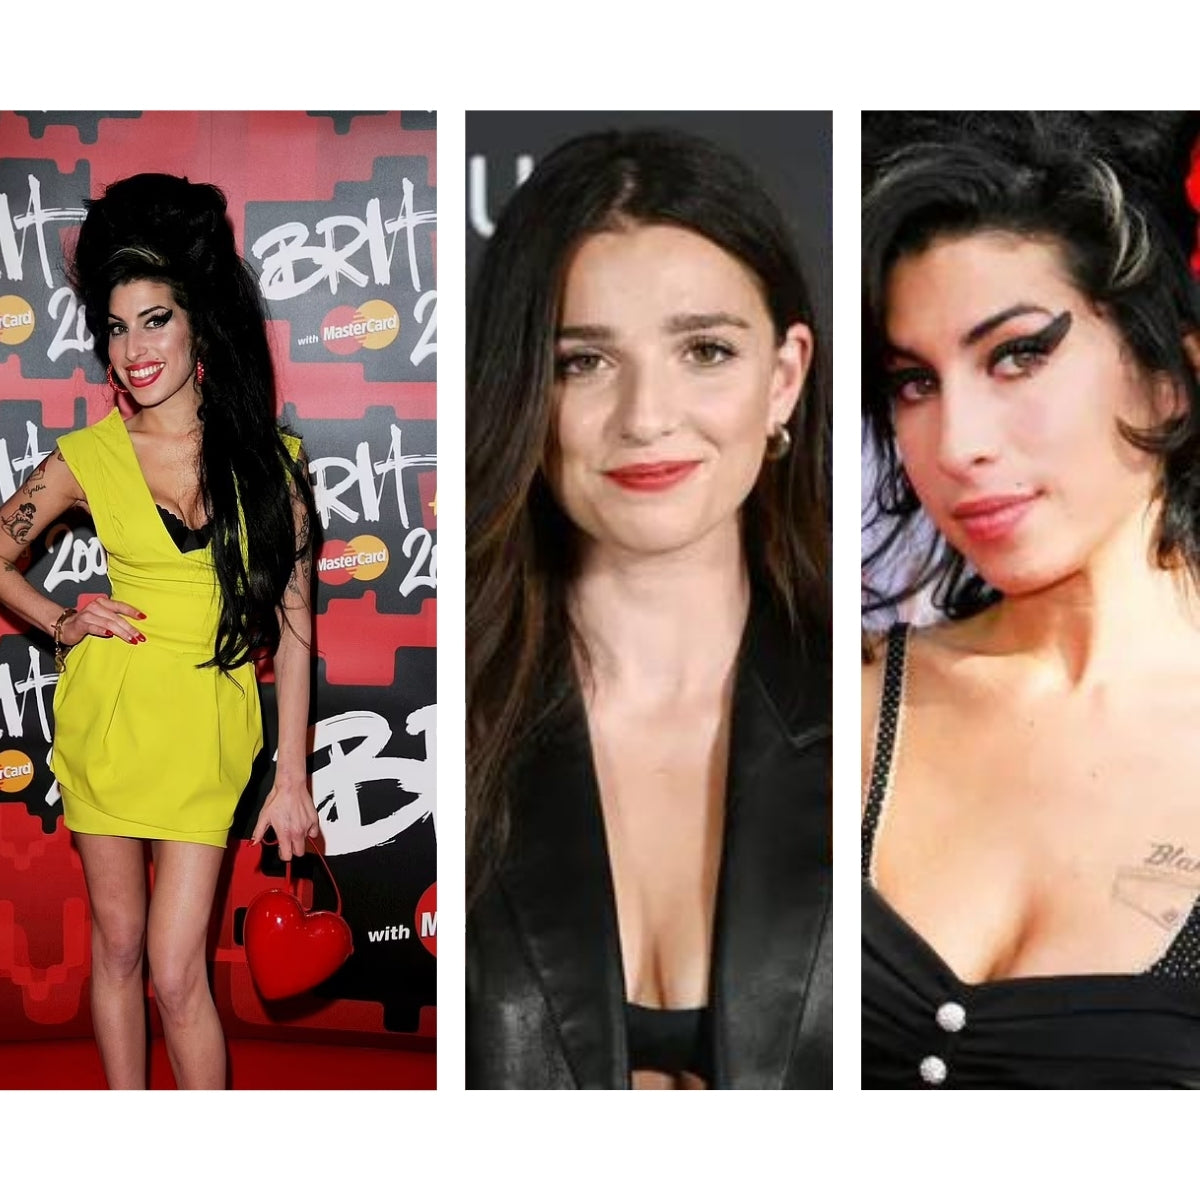 Back To Black Has Found Its Amy - Who Will Reprise the Role of Amy Winehouse?